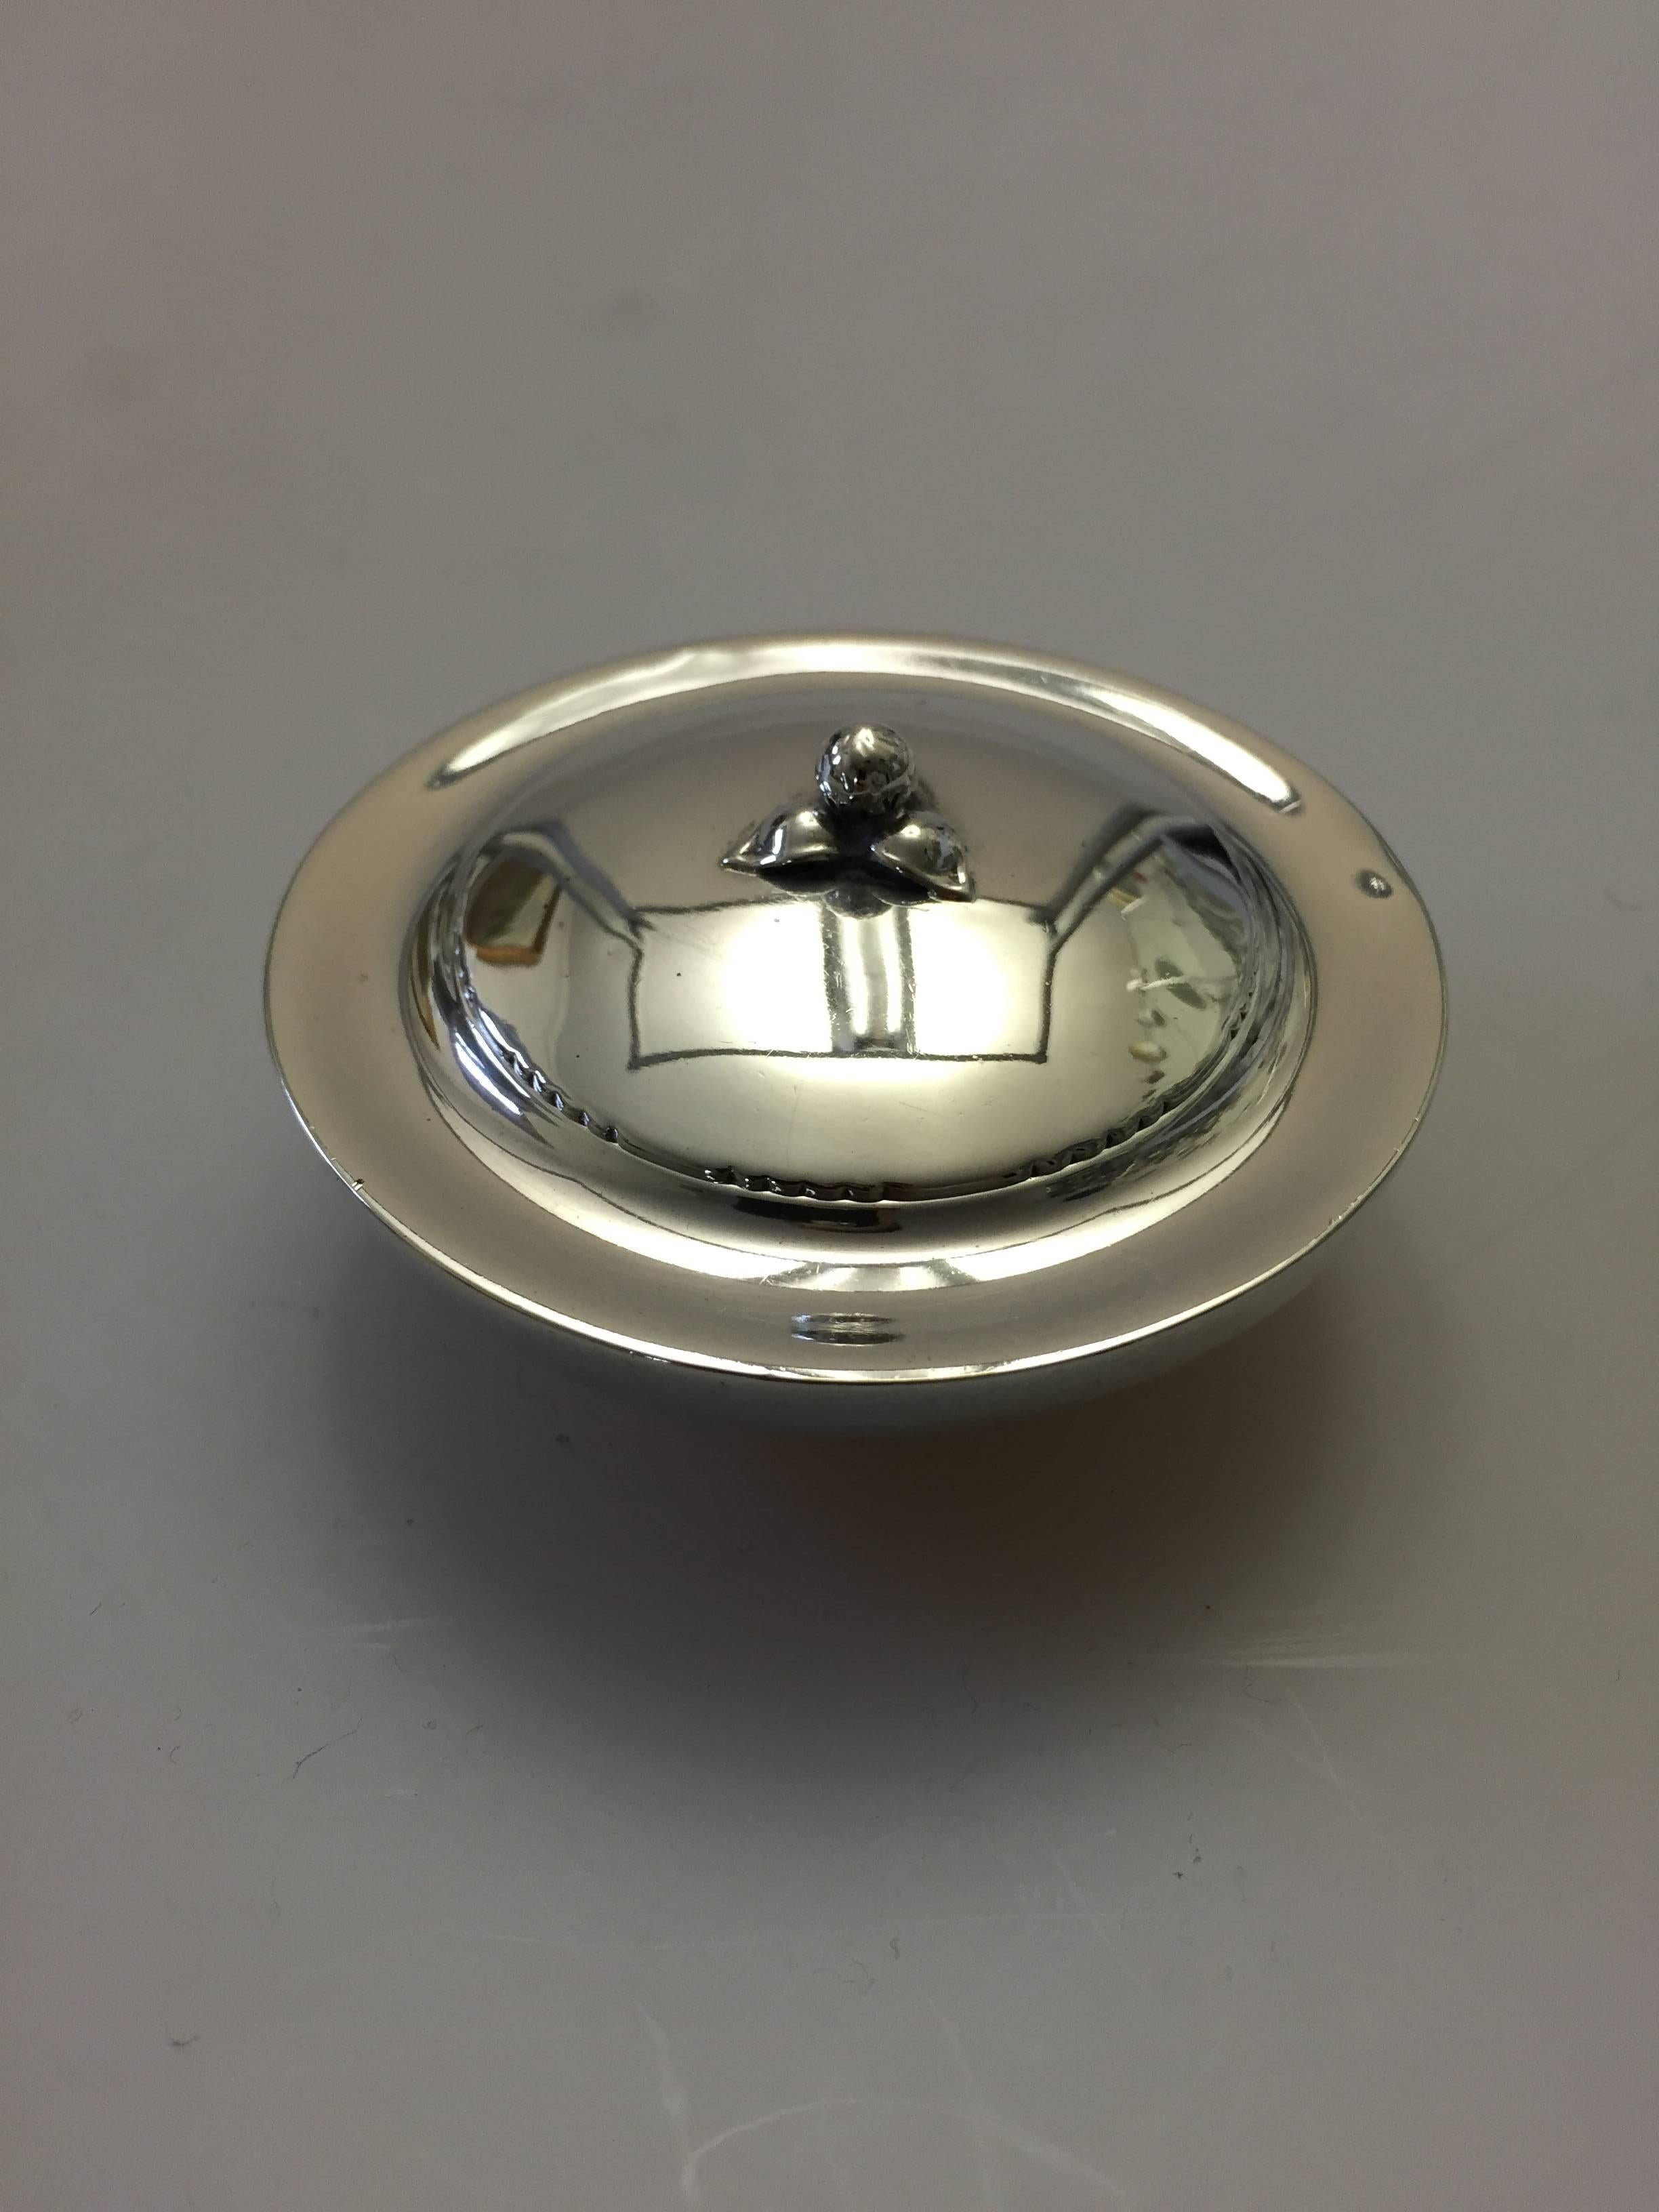 Georg Jensen sterling silver Bonbonniere with early marks. Designed by Johan Rohde.

Johan Rohde designed products for Georg Jensen silver Smithy, beginning in 1906. Rohde's designs have much in common with Georg Jensen's own as in they bear the